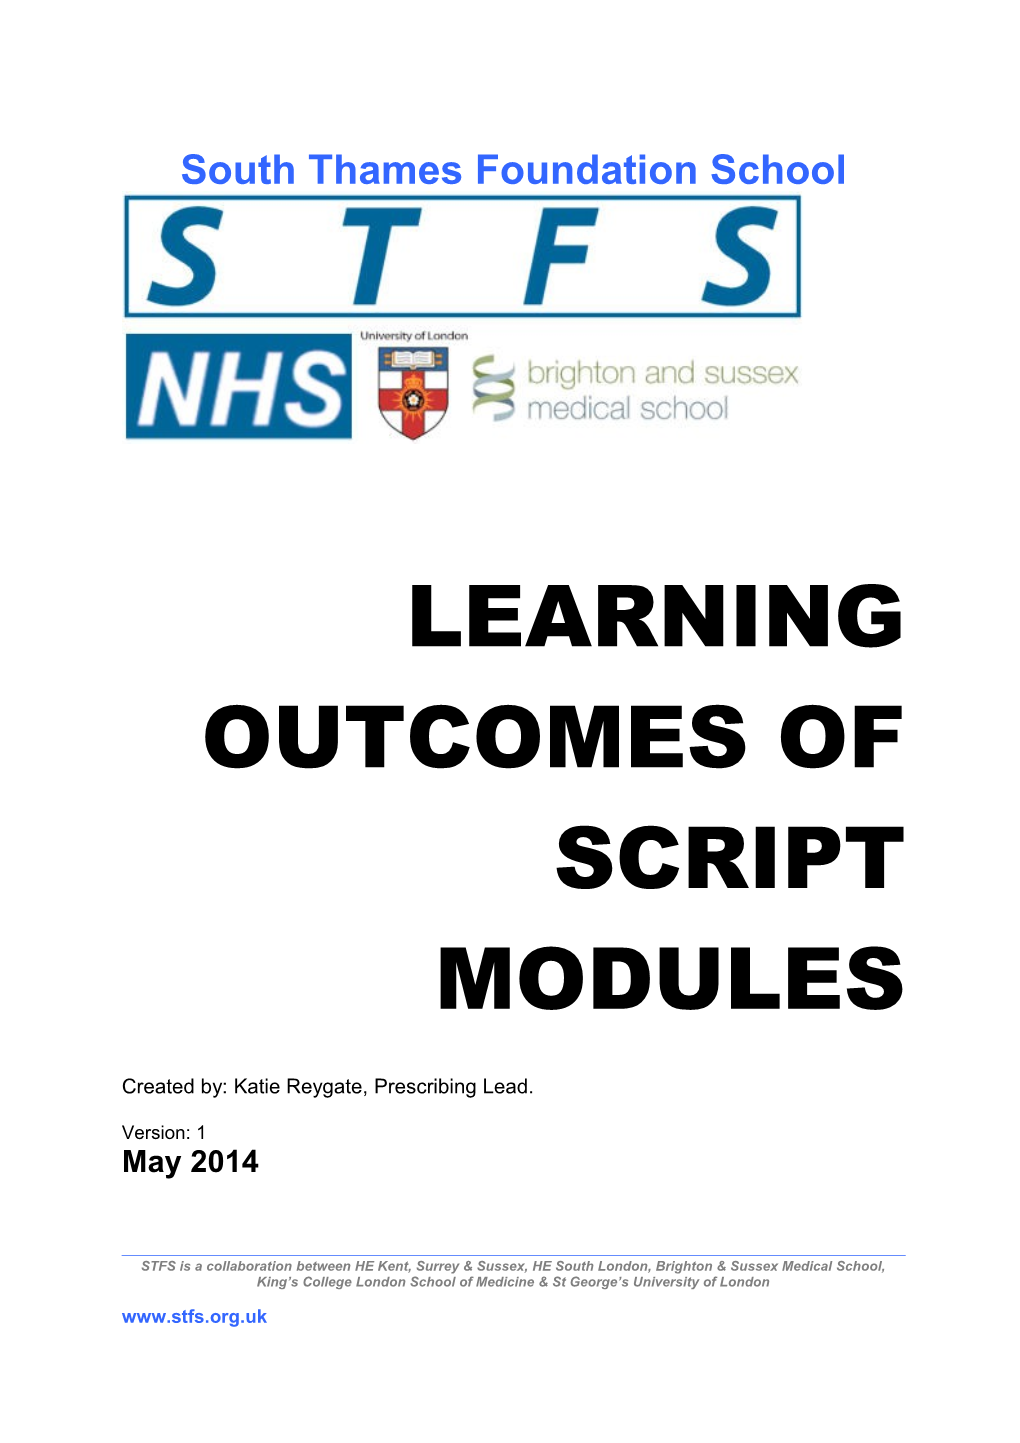 Learning Outcomes of Script Modules